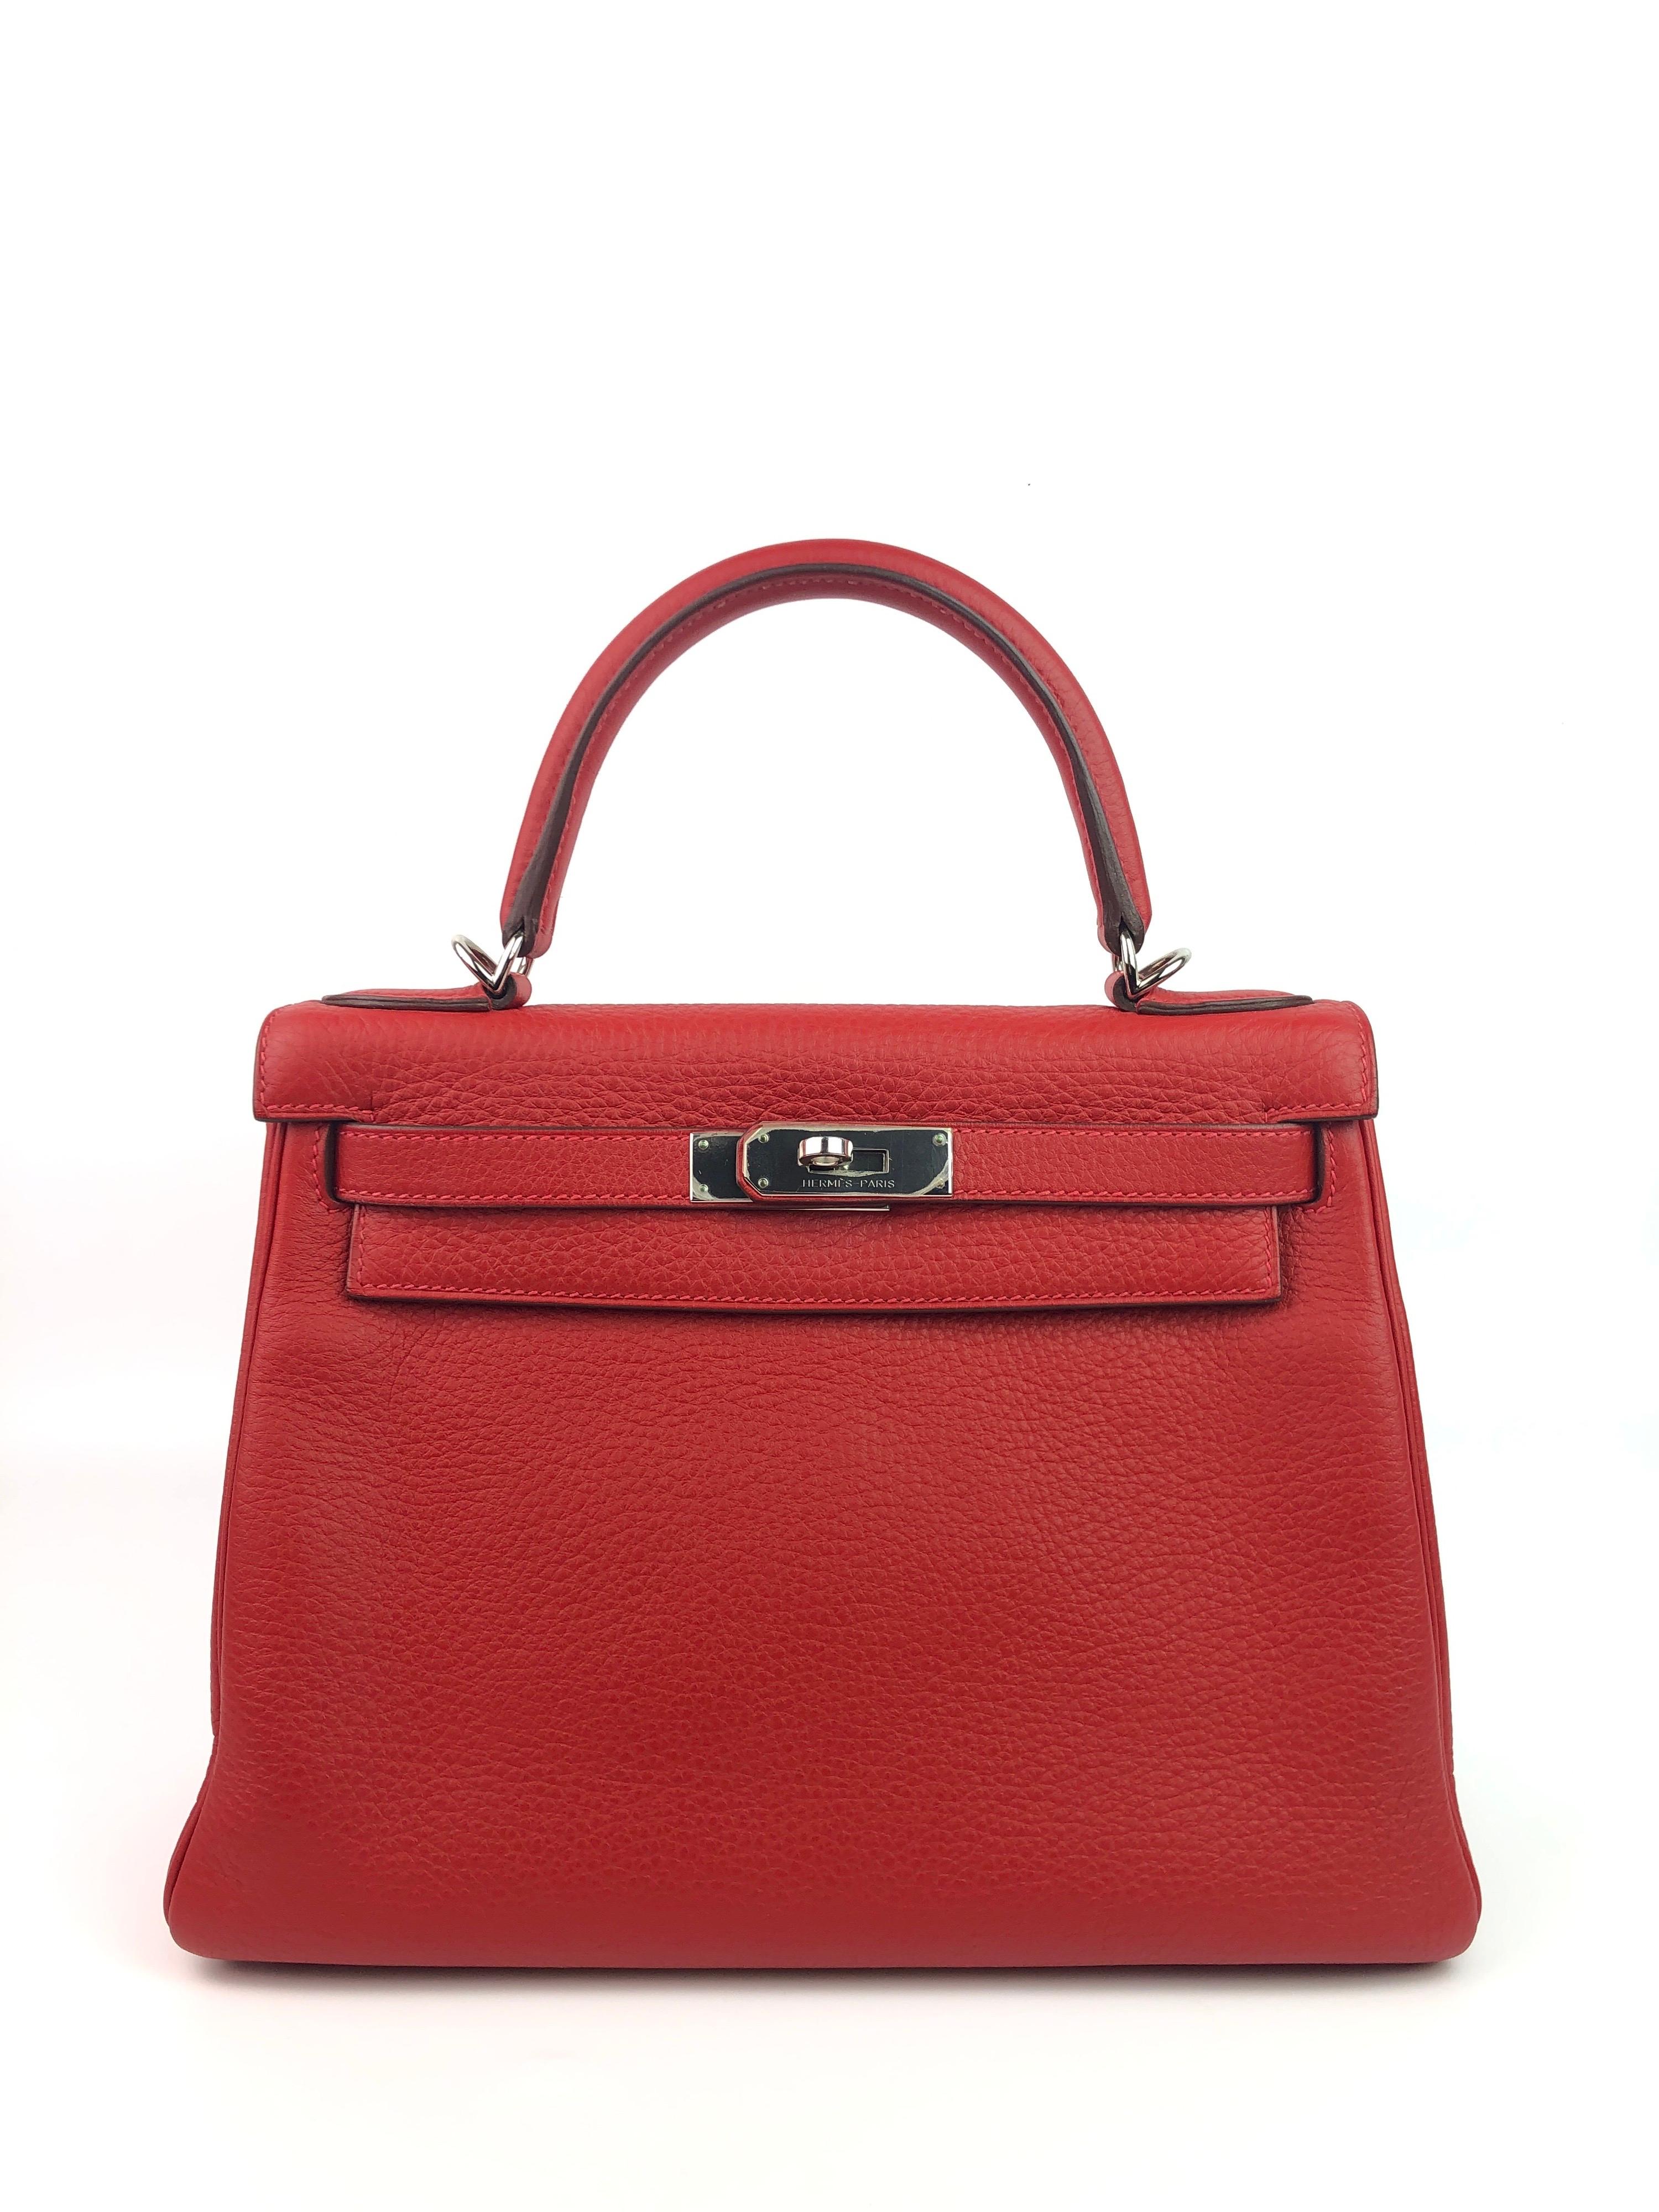 Hermes Kelly 28 Rouge Casaque Red Palladium Hardware . 2012 P STAMP. Excellent Condition, Plastic On Hardware, perfect corners and excellent structure. 

Shop with confidence from Lux Addicts. Authenticity guaranteed! 